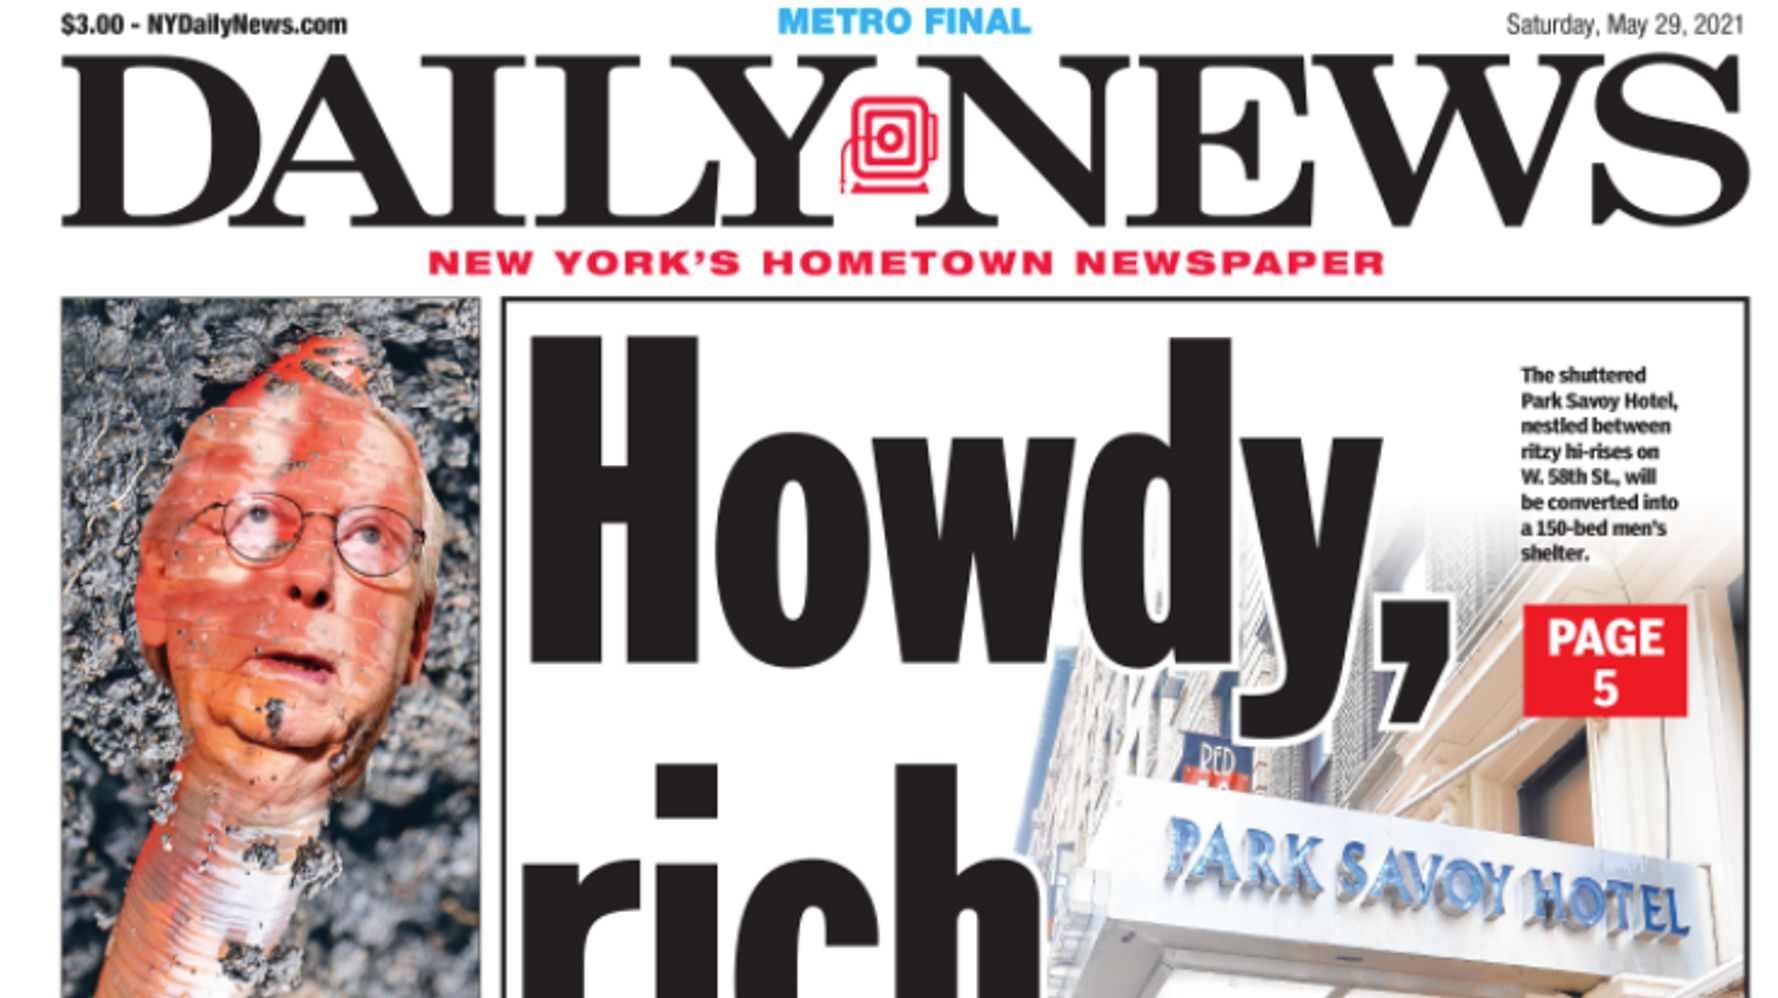 Mitch McConnell Is A 'Spineless McWorm' On Damning New York Daily News Cover